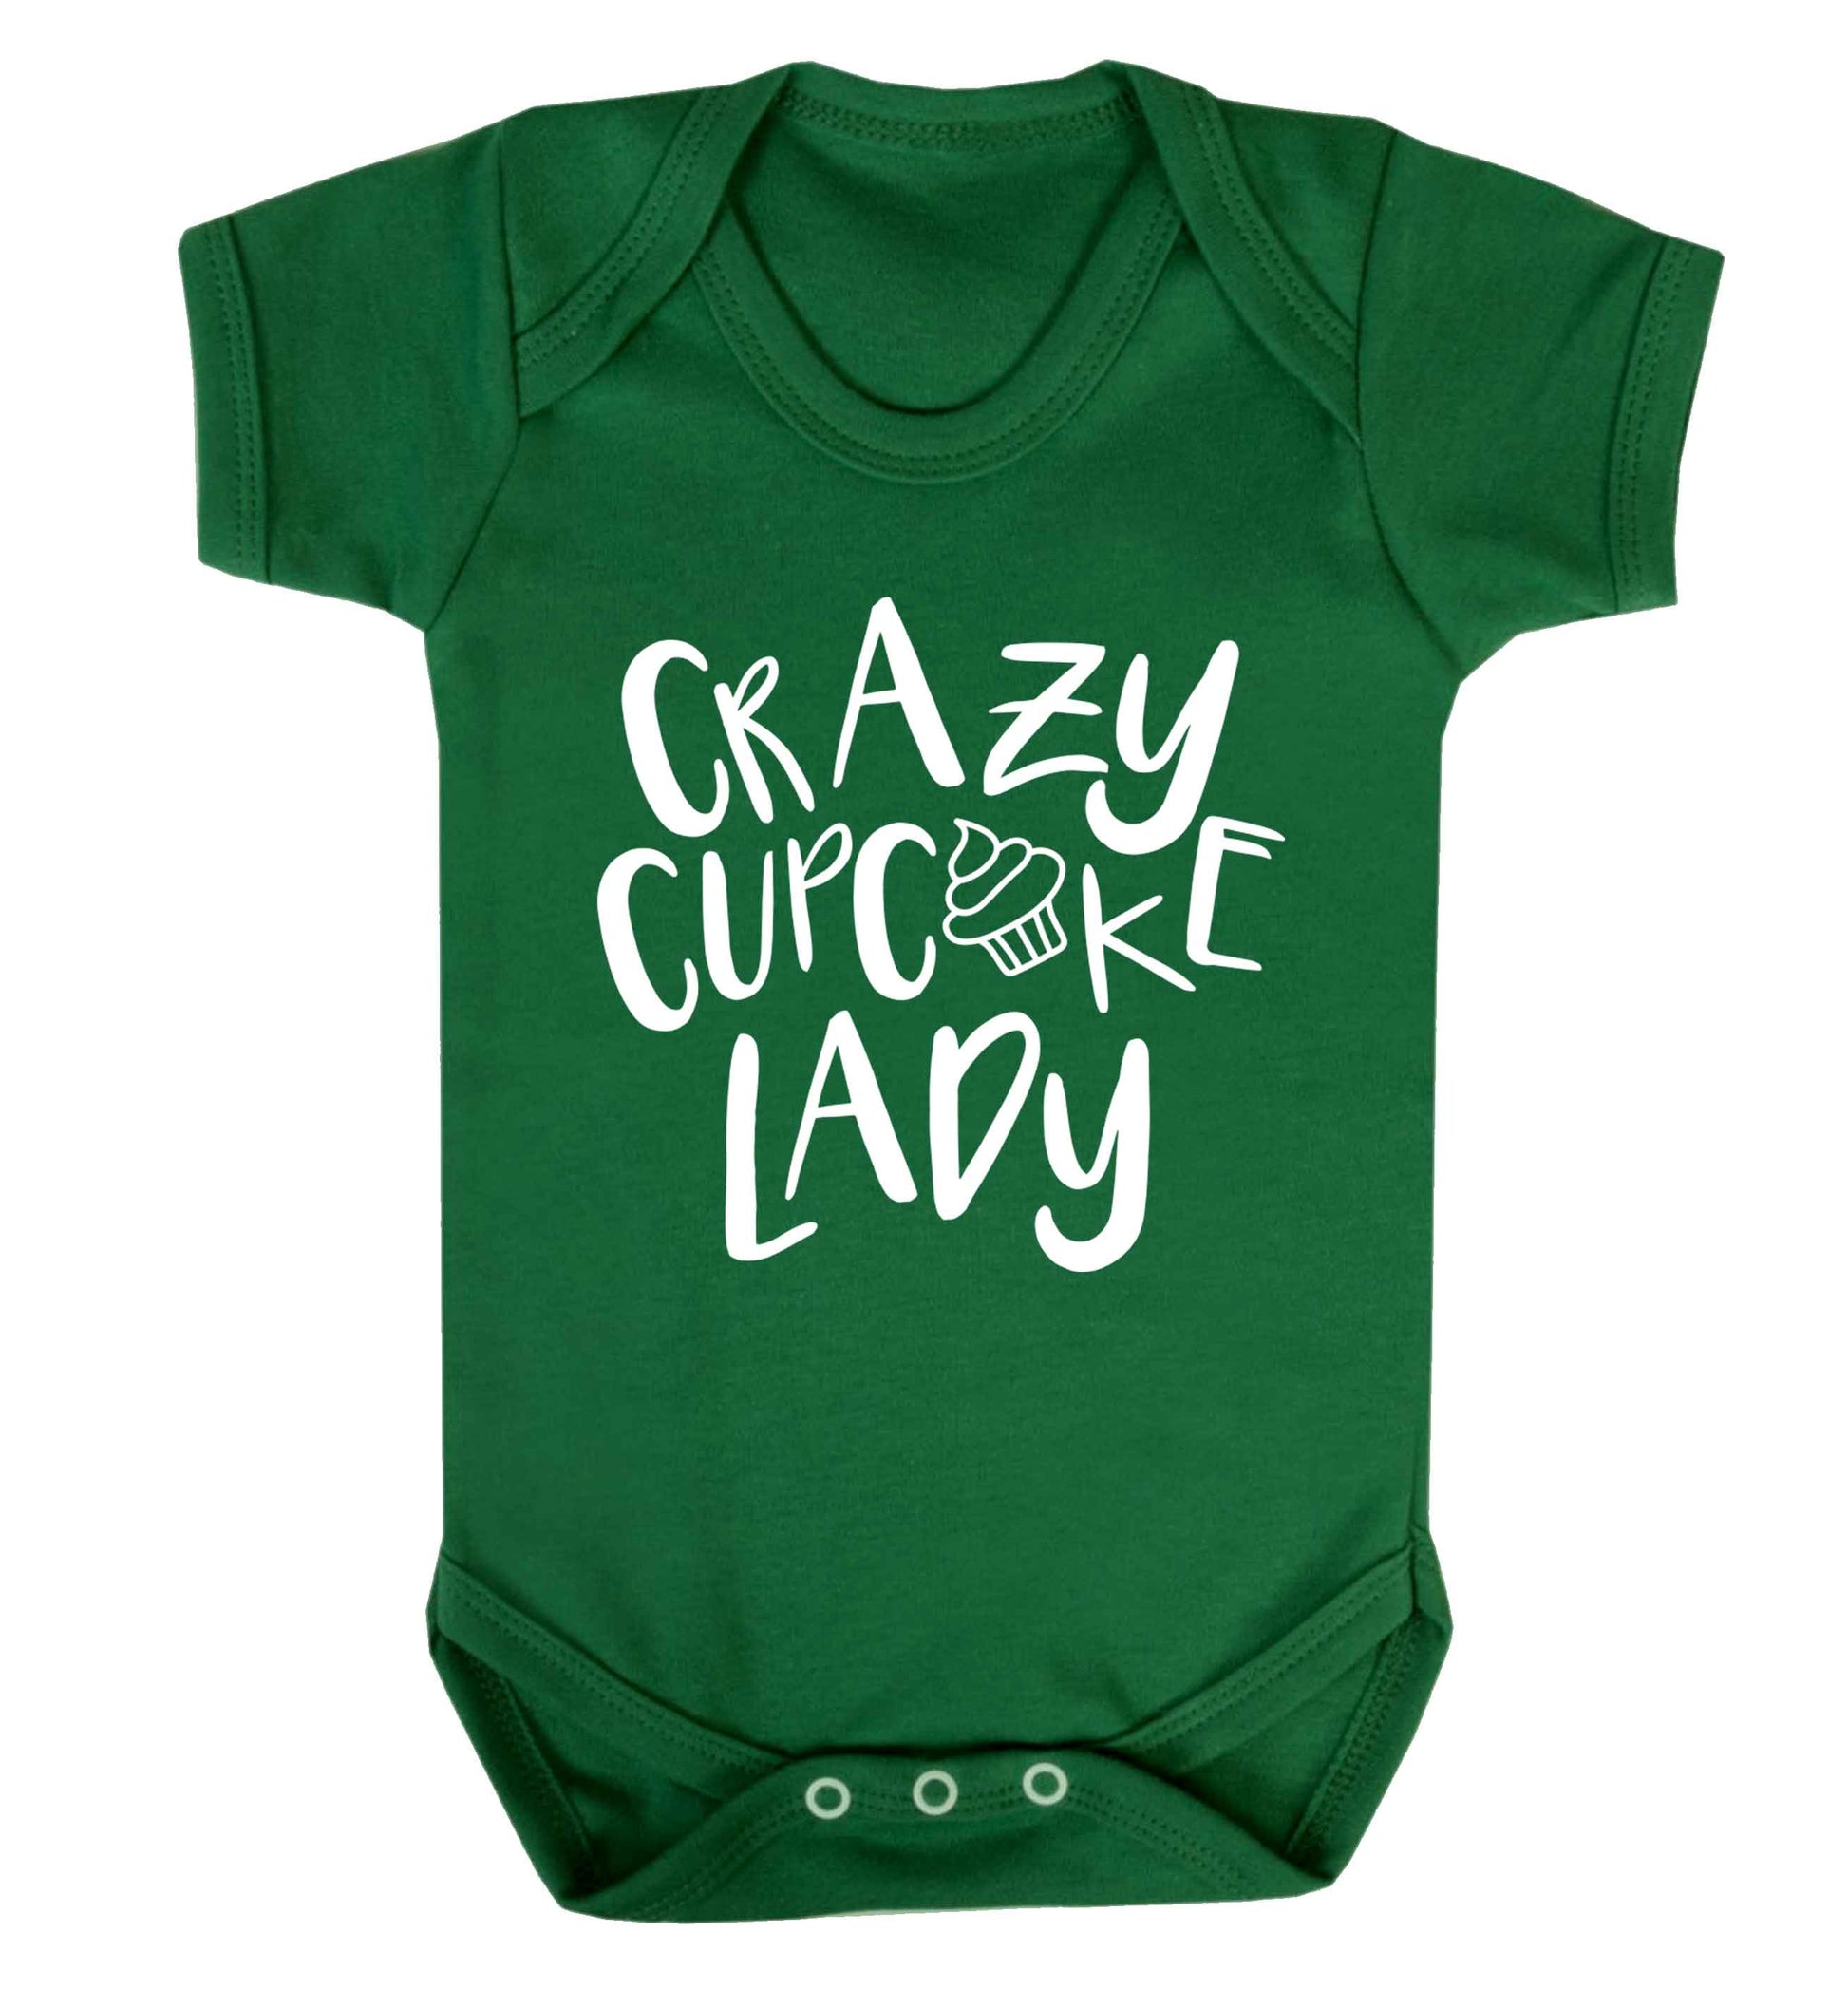 Crazy cupcake lady Baby Vest green 18-24 months